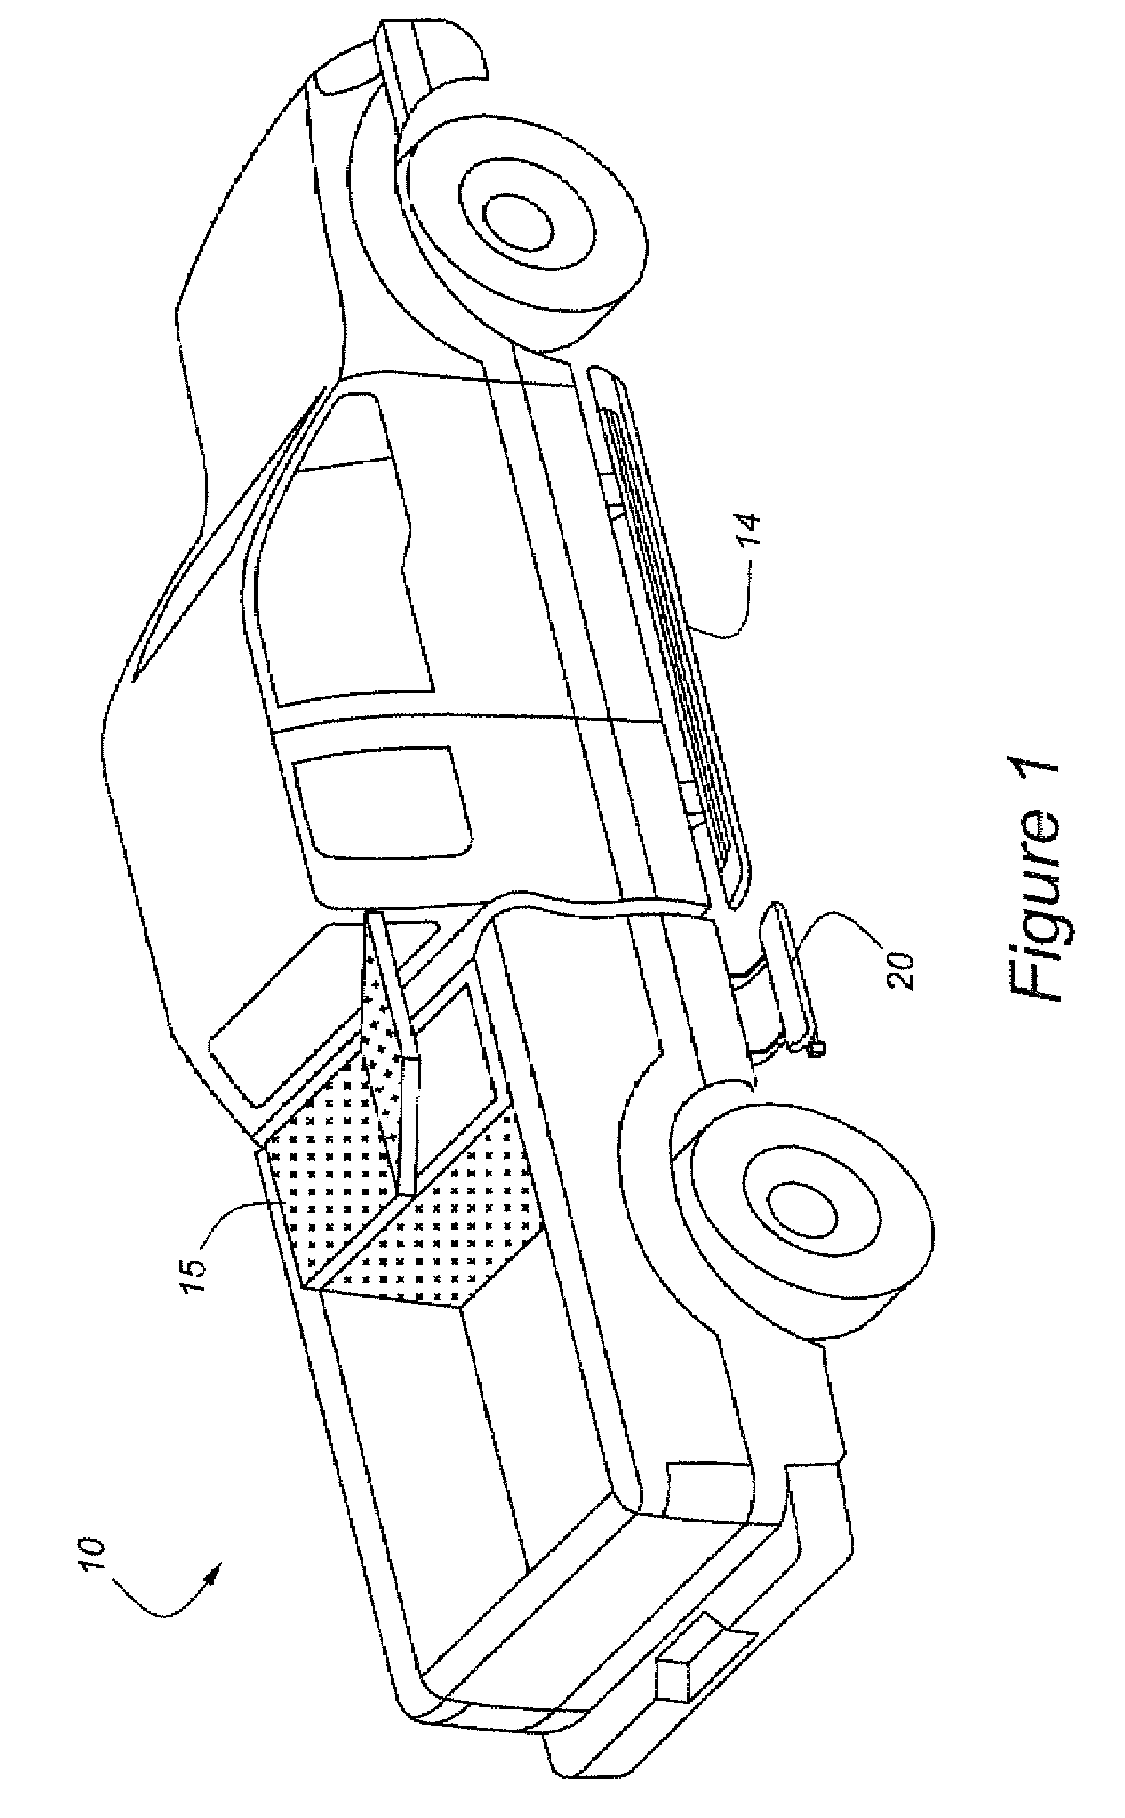 Articulated step system for automotive vehicle